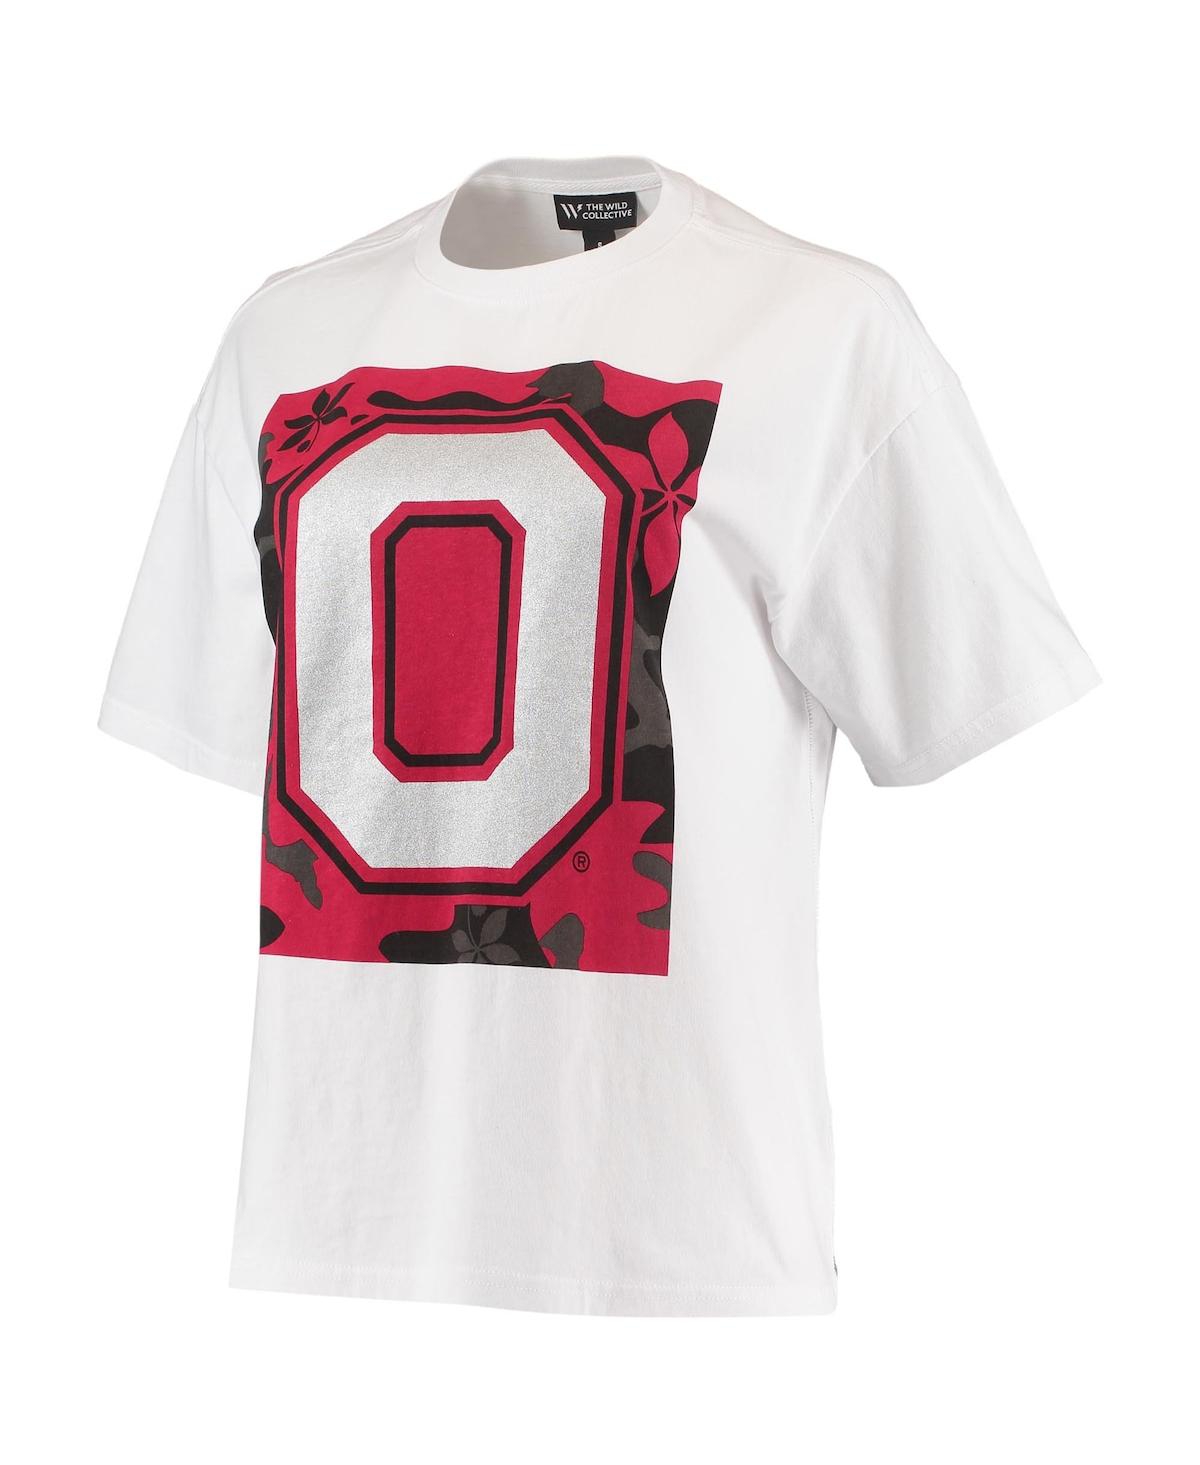 Shop The Wild Collective Women's  White Ohio State Buckeyes Camo Boxy Graphic T-shirt